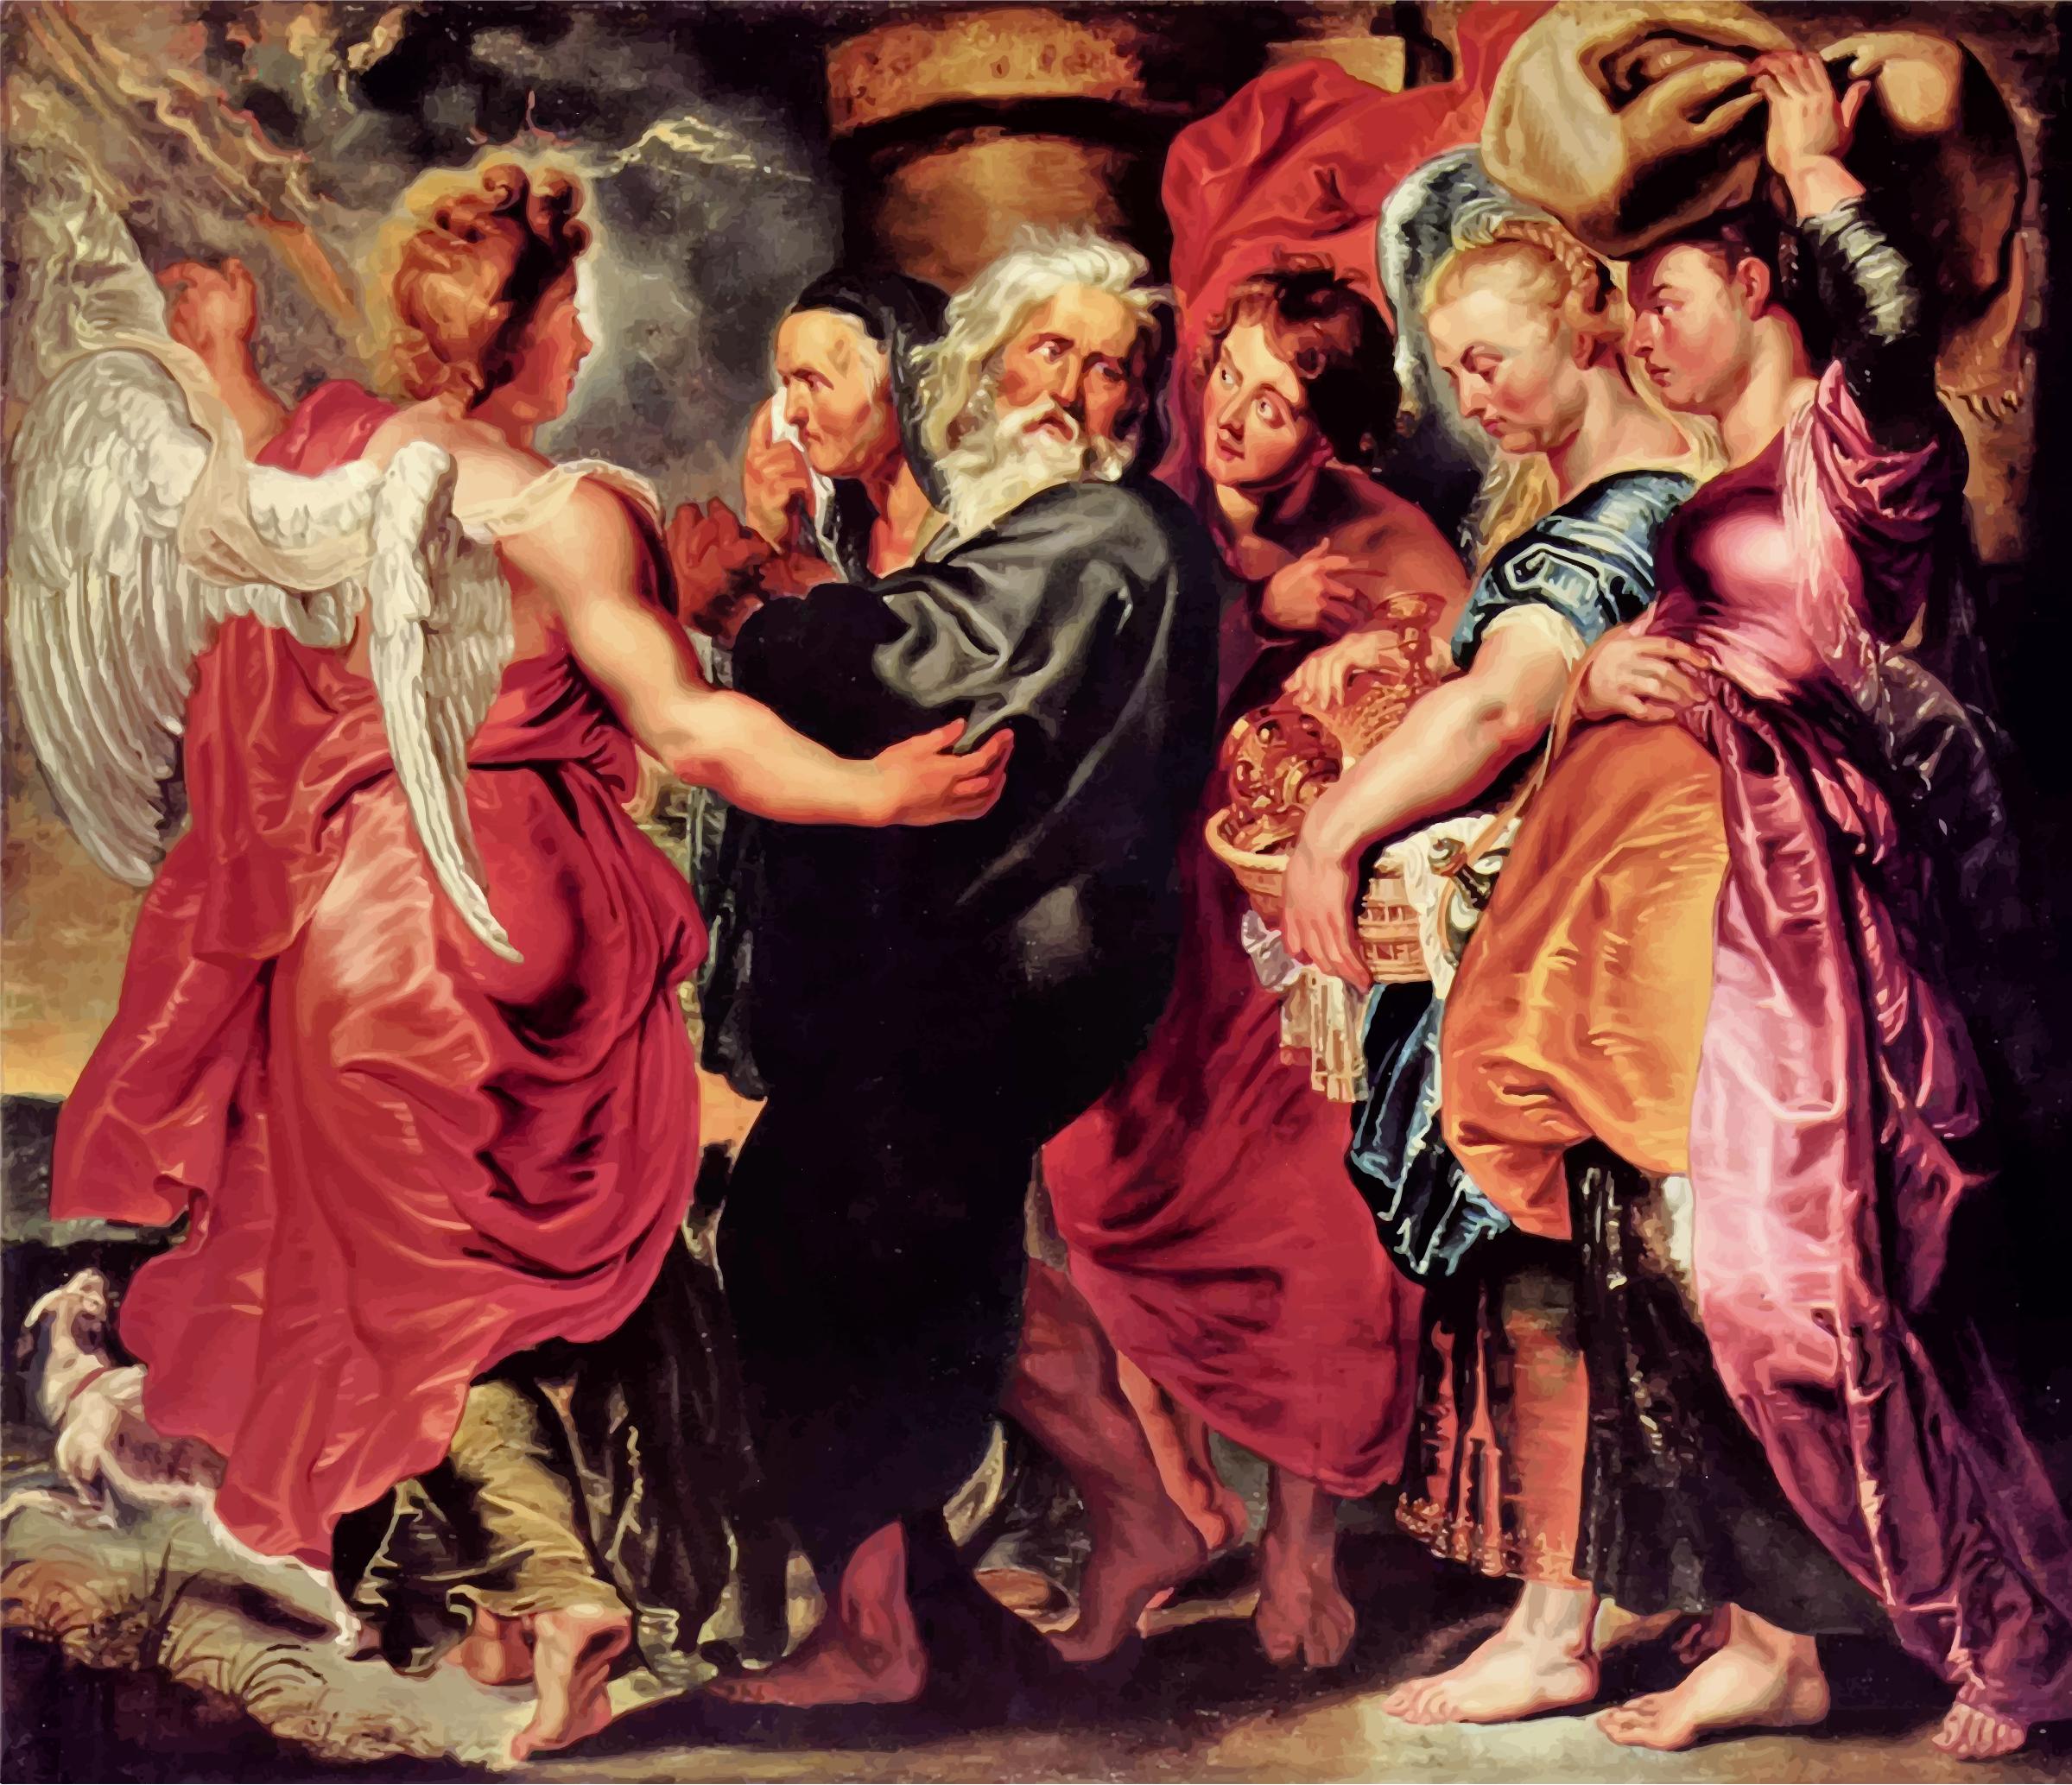 Lot Leaves Sodom with His Family By Peter Paul Rubens png